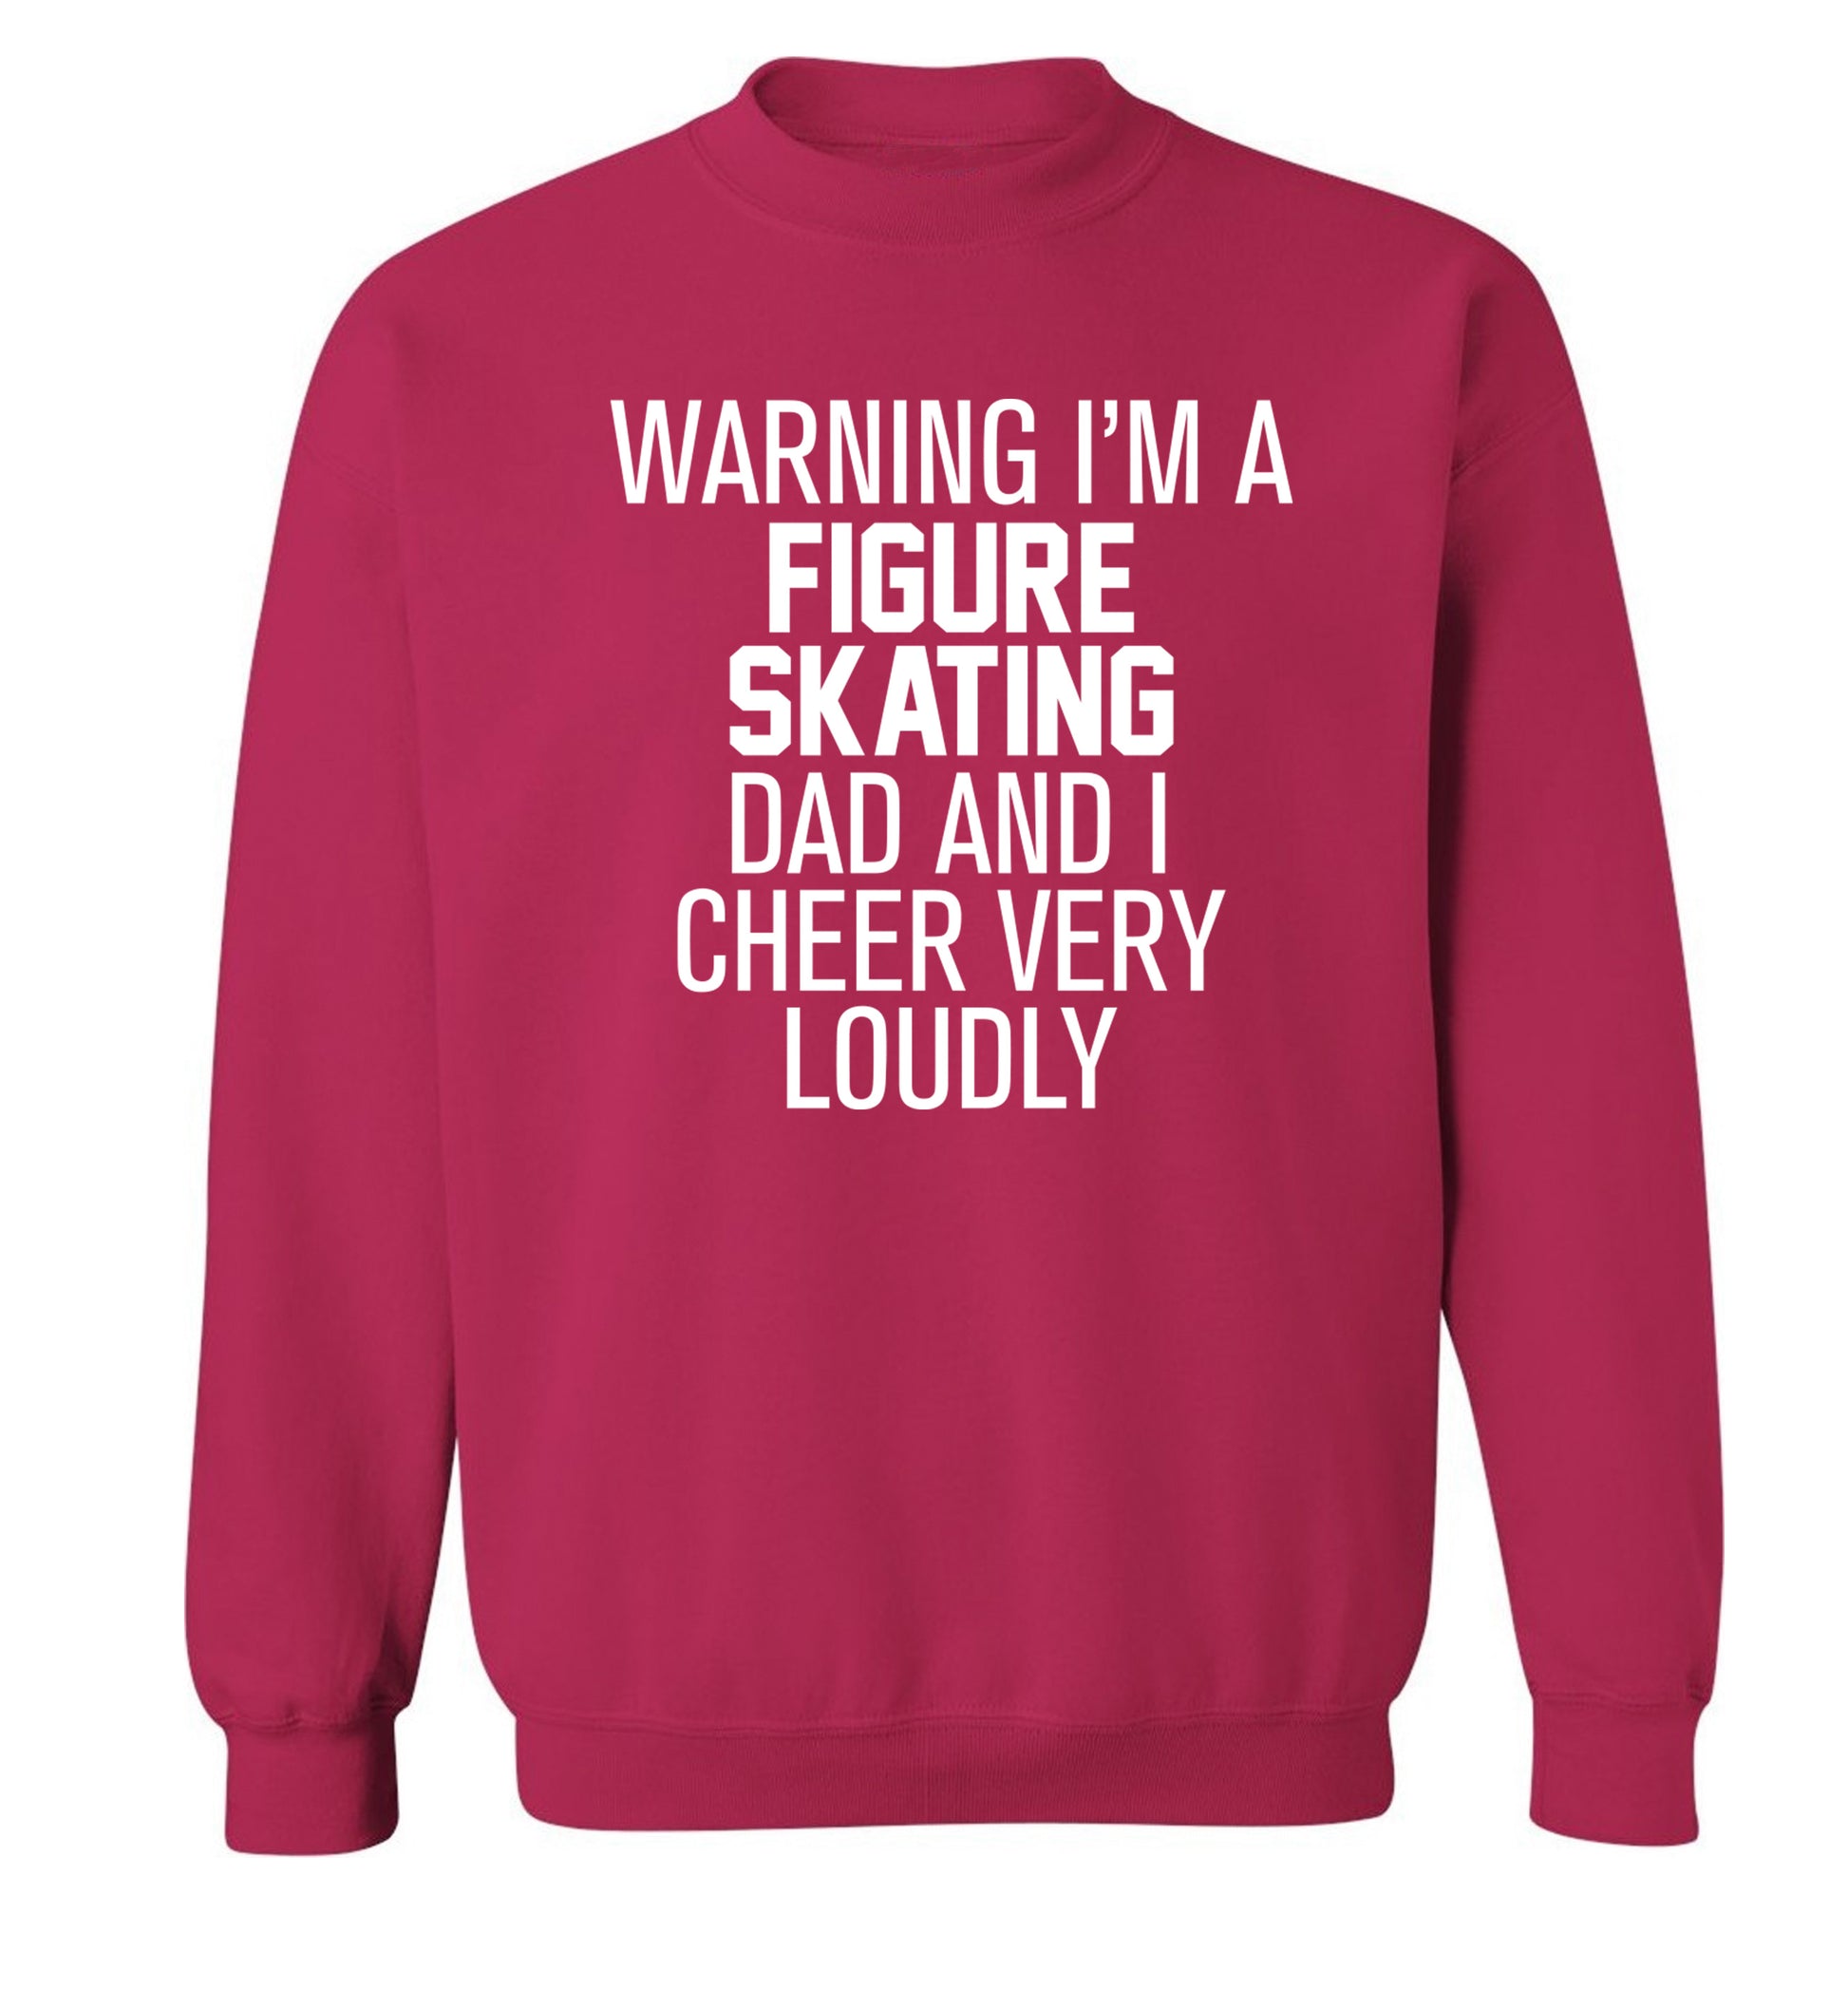 Warning I'm a figure skating dad and I cheer very loudly Adult's unisexpink Sweater 2XL